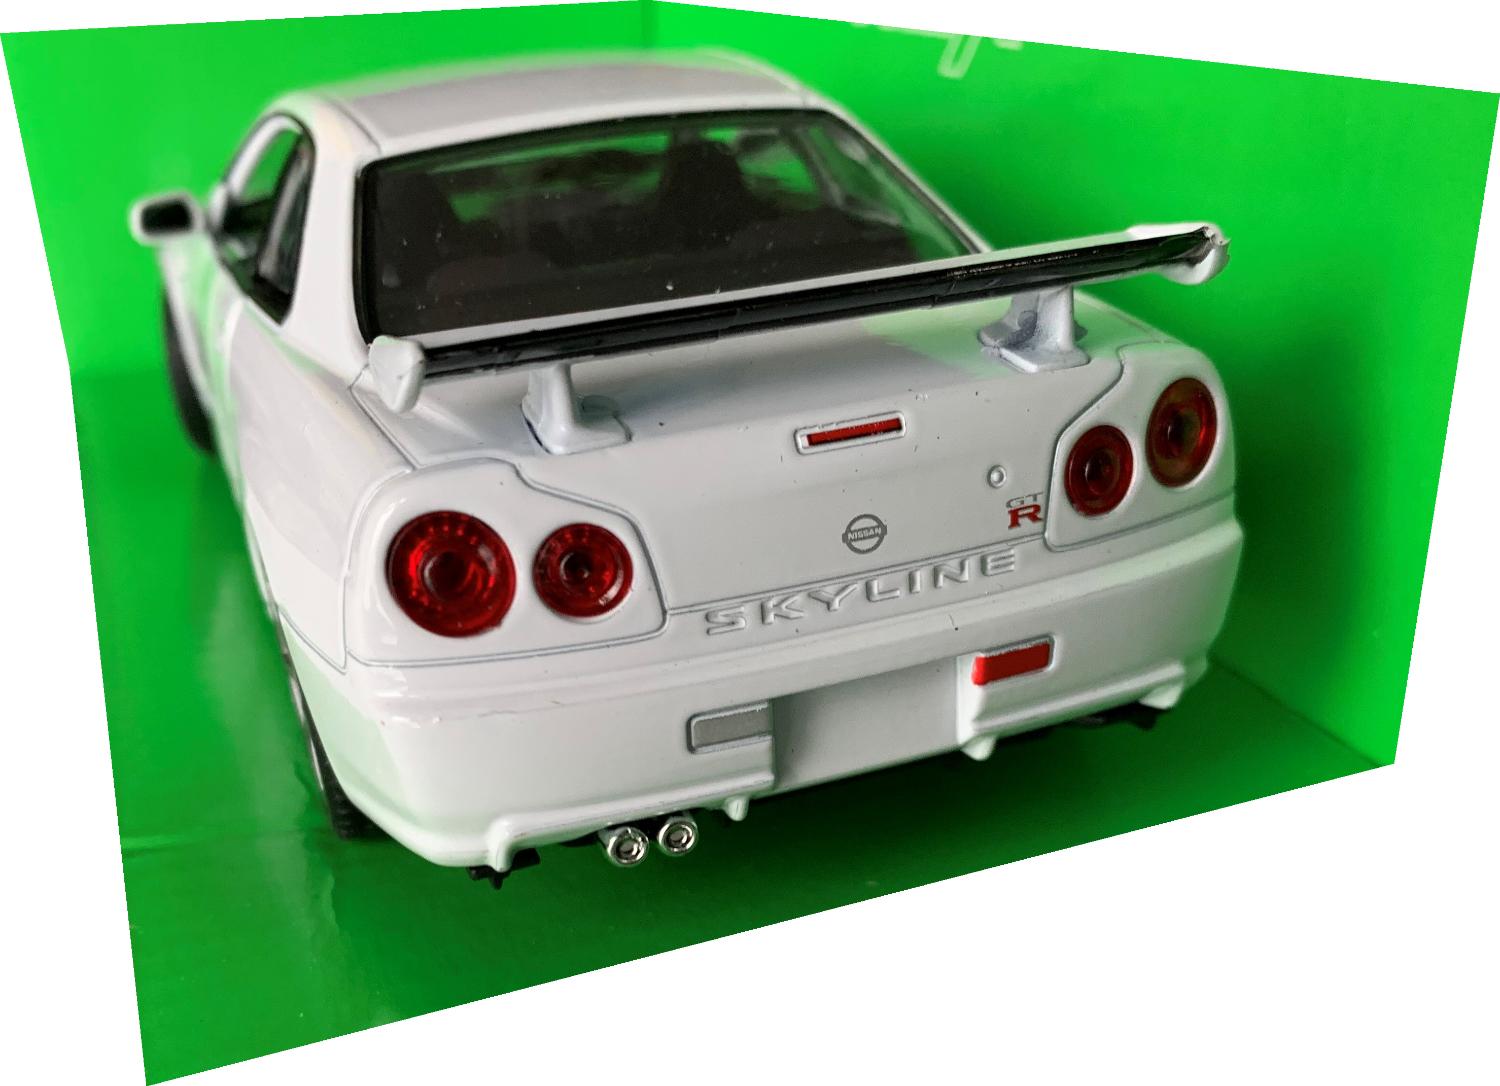 An excellent reproduction of the Nissan Skyline GT-R (34) with high level of detail throughout, all authentically recreated.